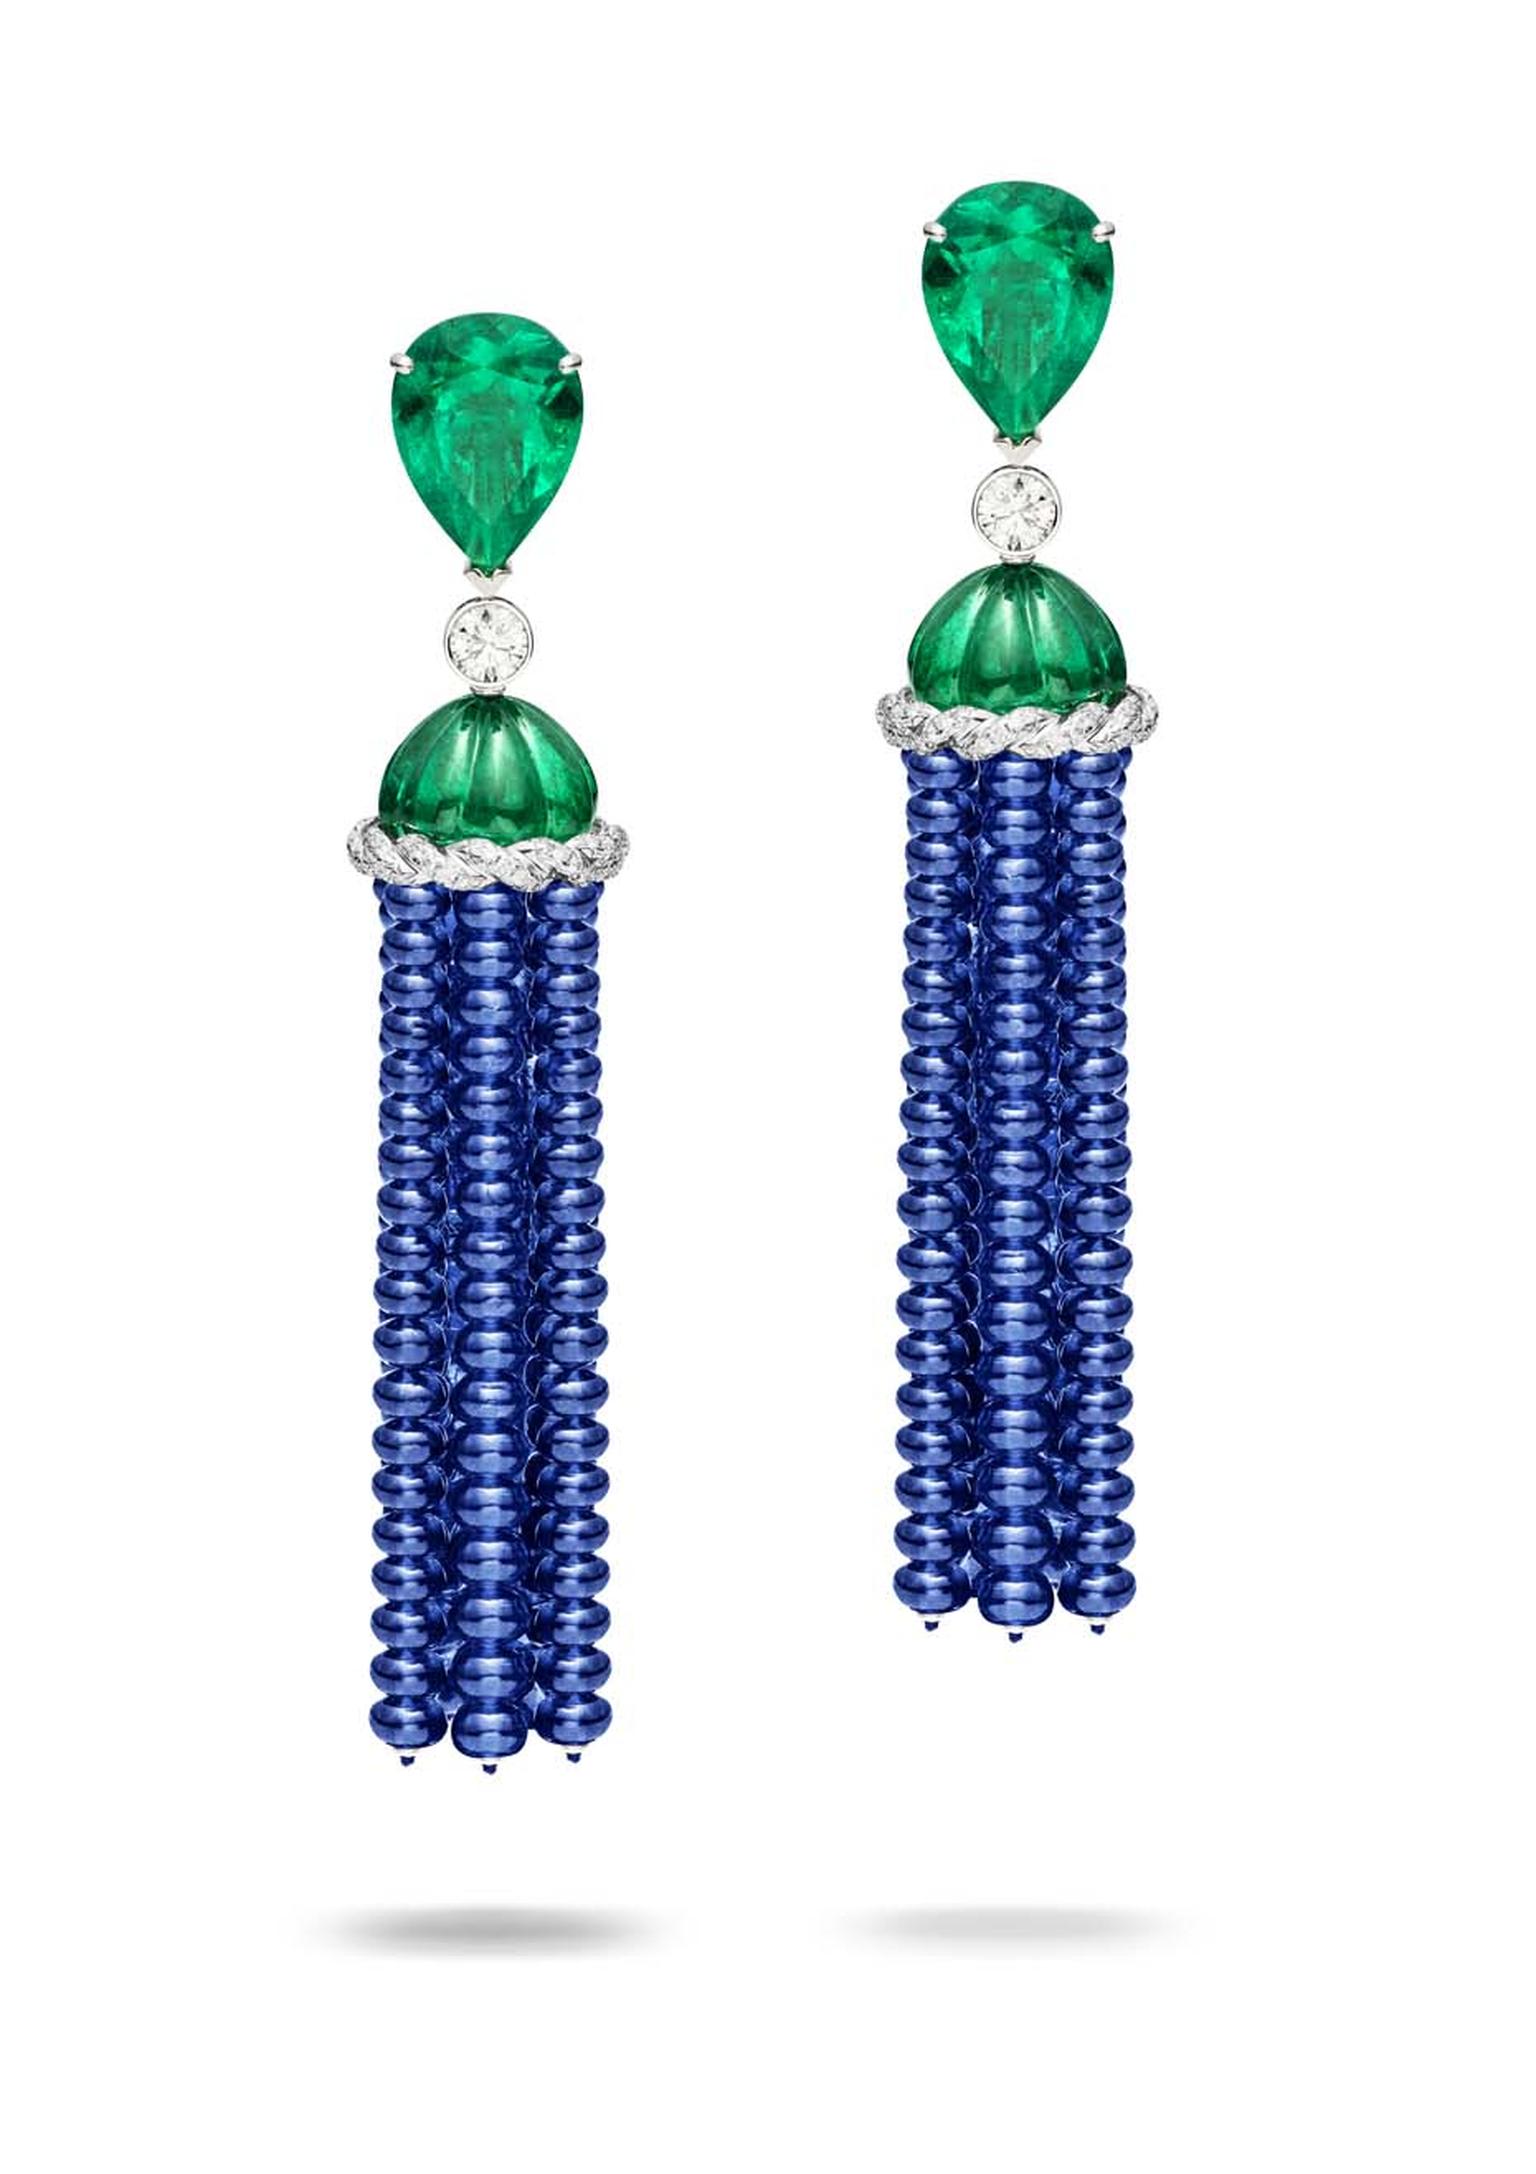 Piaget blue sapphire and emerald earrings, as worn by Gong Li to the 2015 Met Gala in New York.